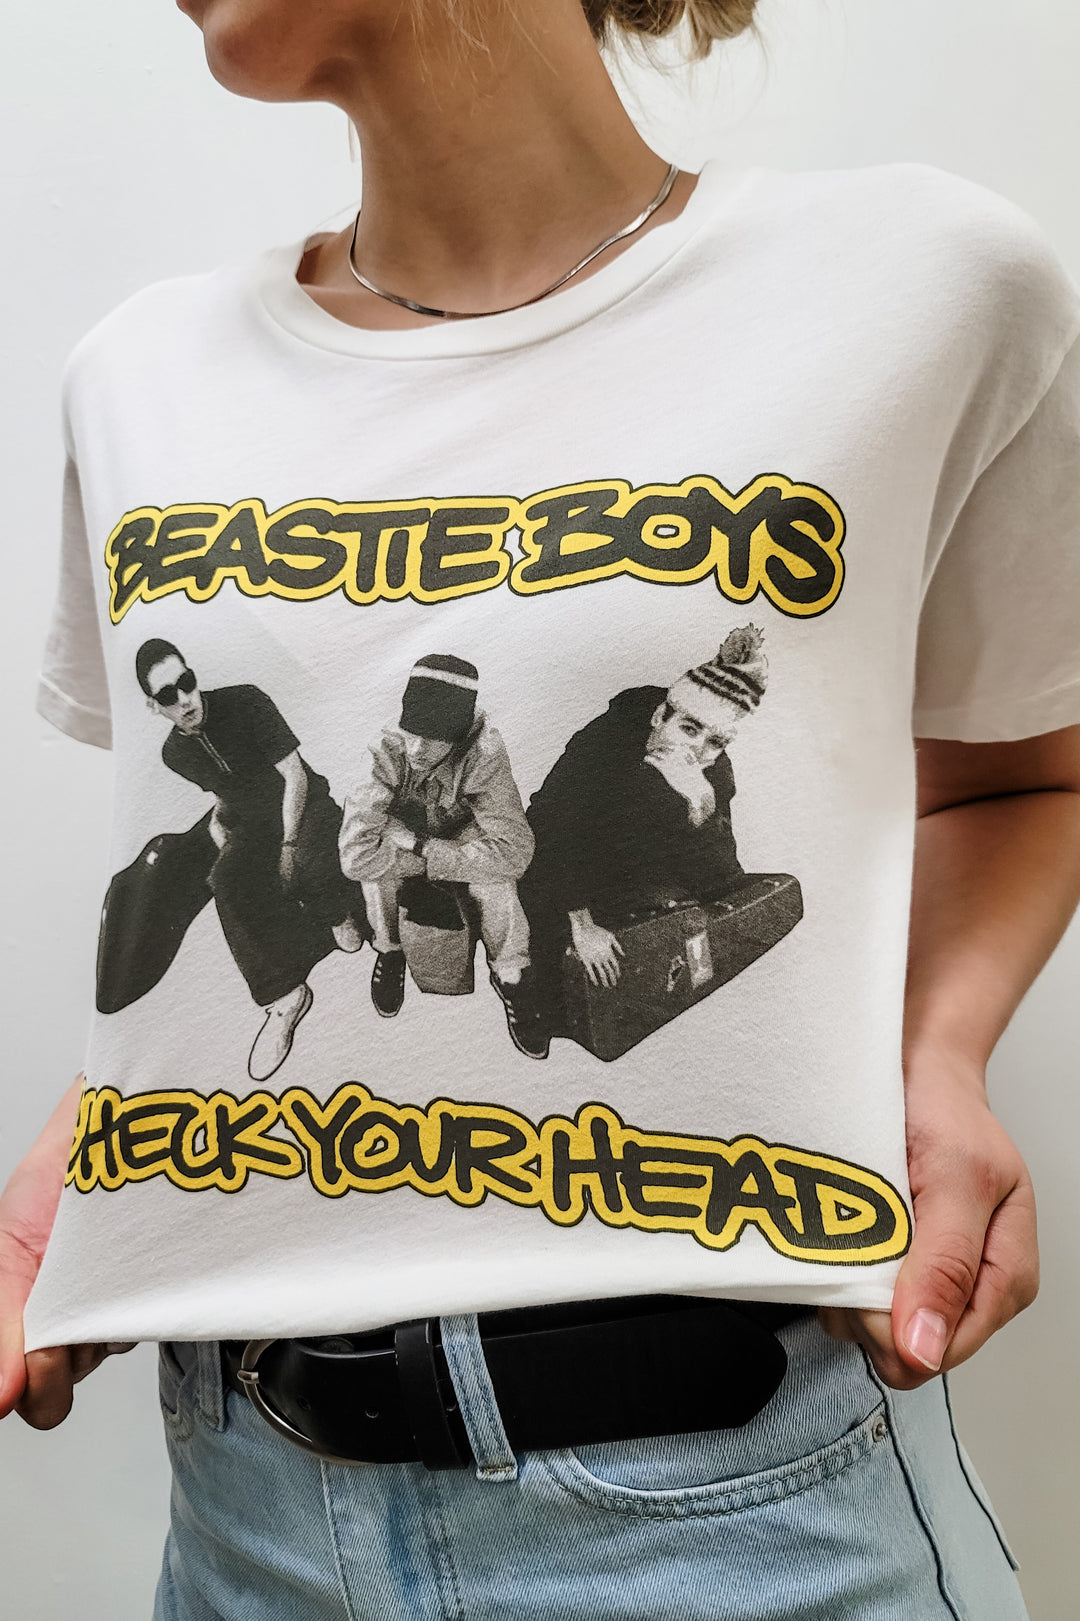 Day Dreamer Beastie Boys Check Your Head White Graphic Tee